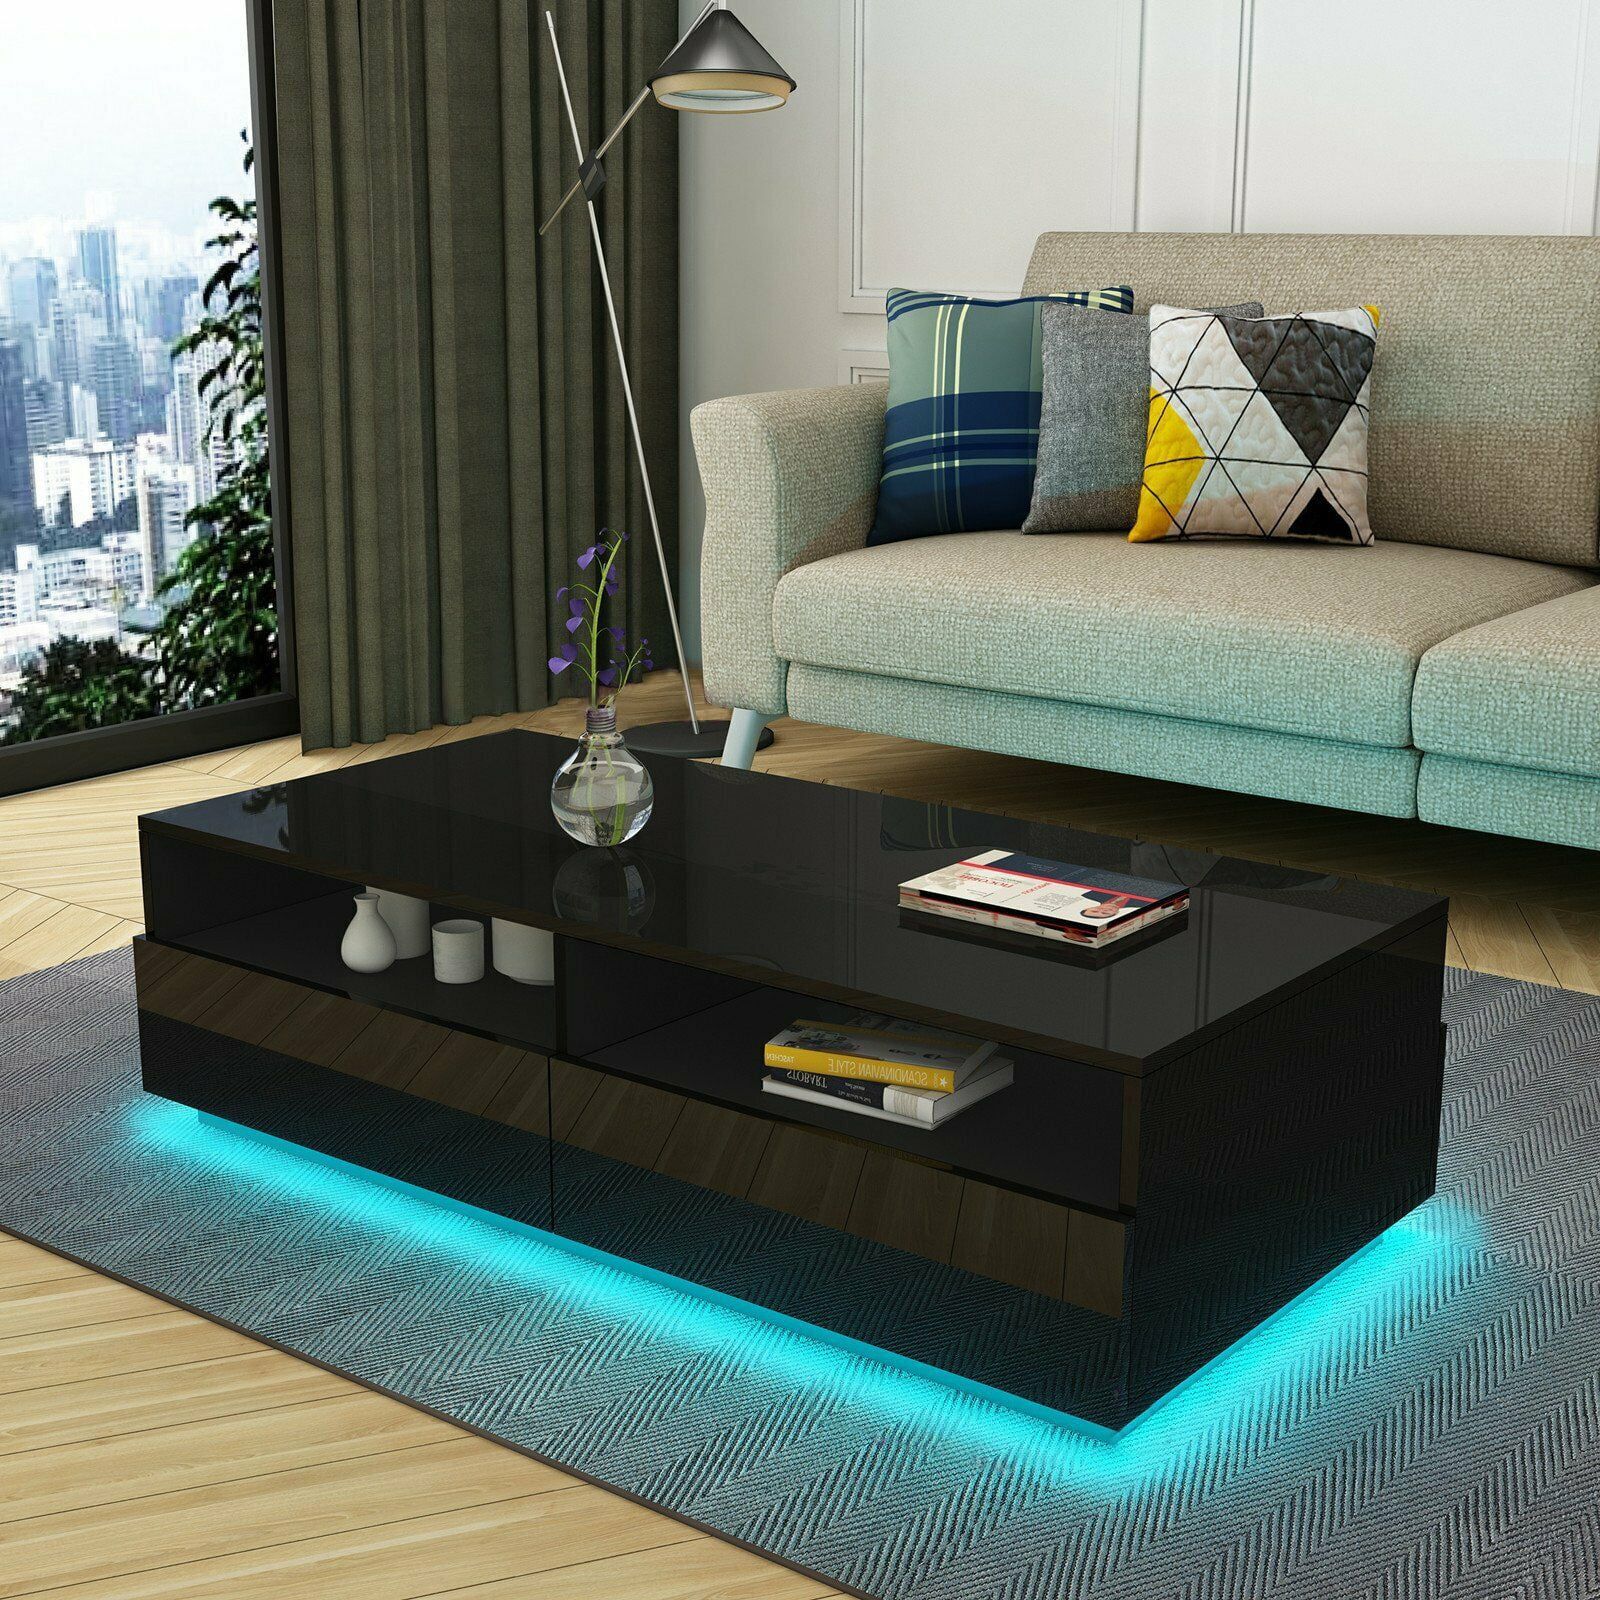 Led Rectangular Coffee Table Tea Modern Living Room Furniture Black Within Led Coffee Tables With 4 Drawers (Gallery 19 of 20)